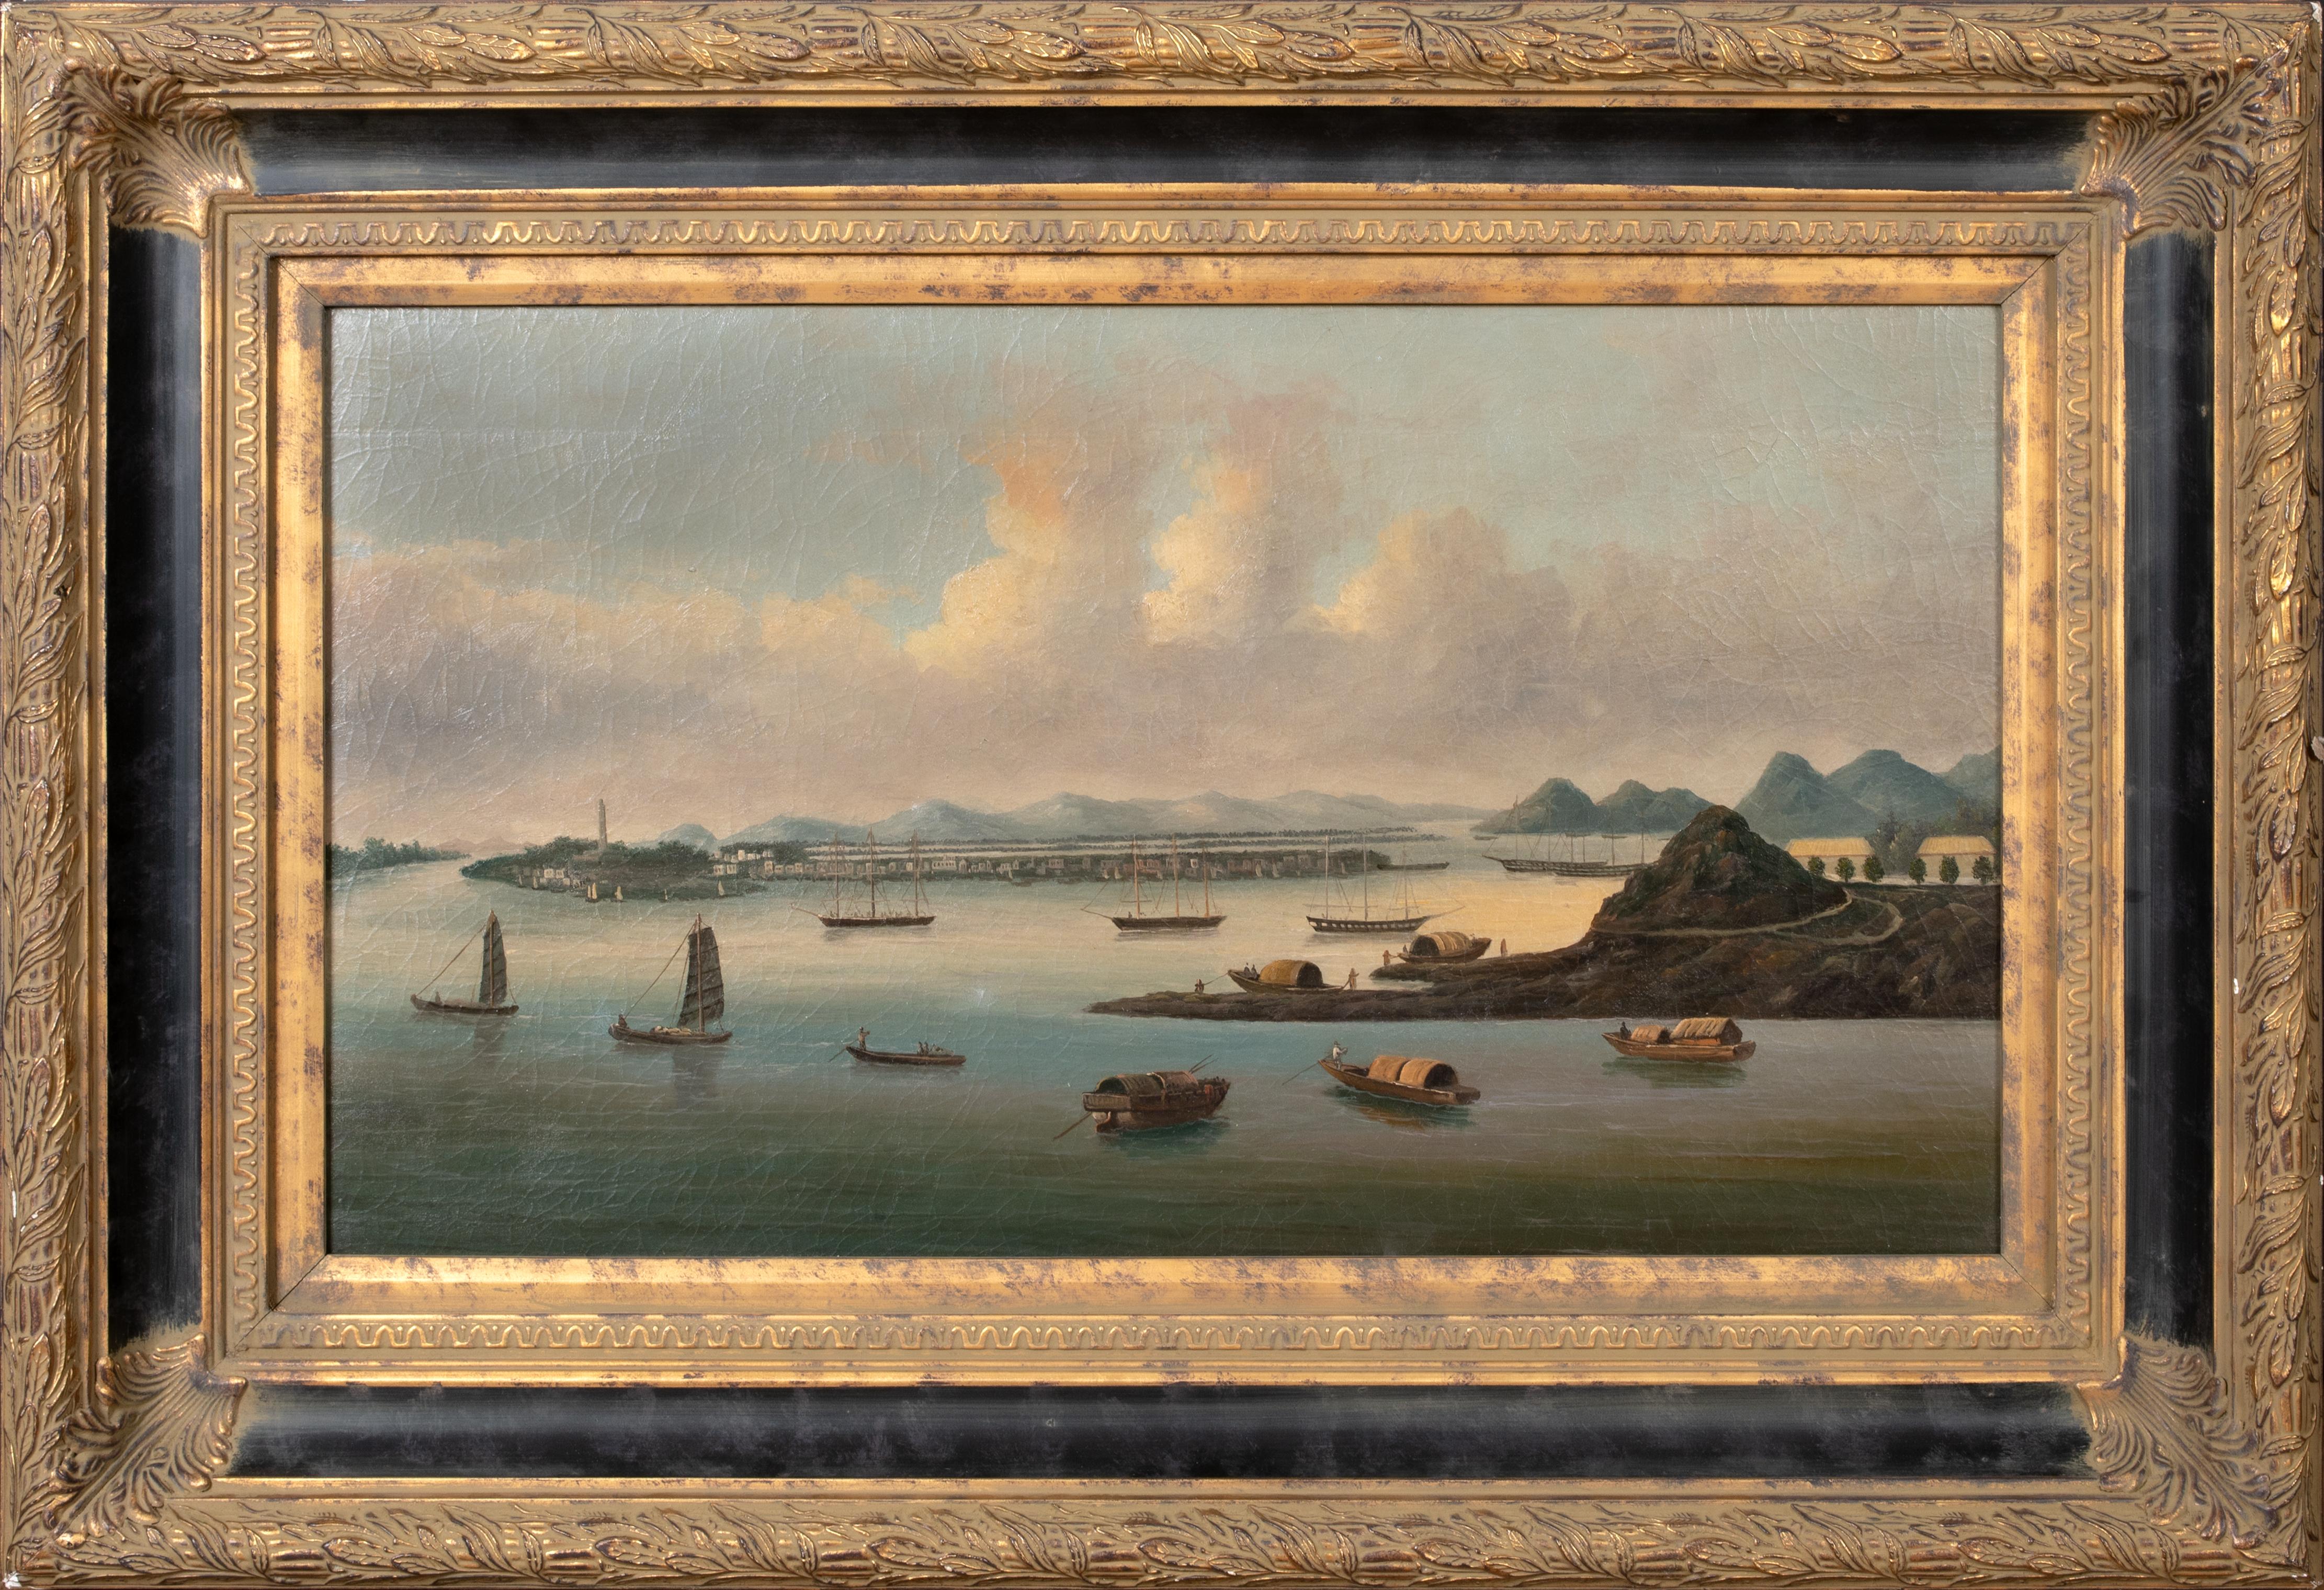 Unknown Landscape Painting - View Of Whampoa Anchorage China, 19th Century  Chinese Trade Export Port